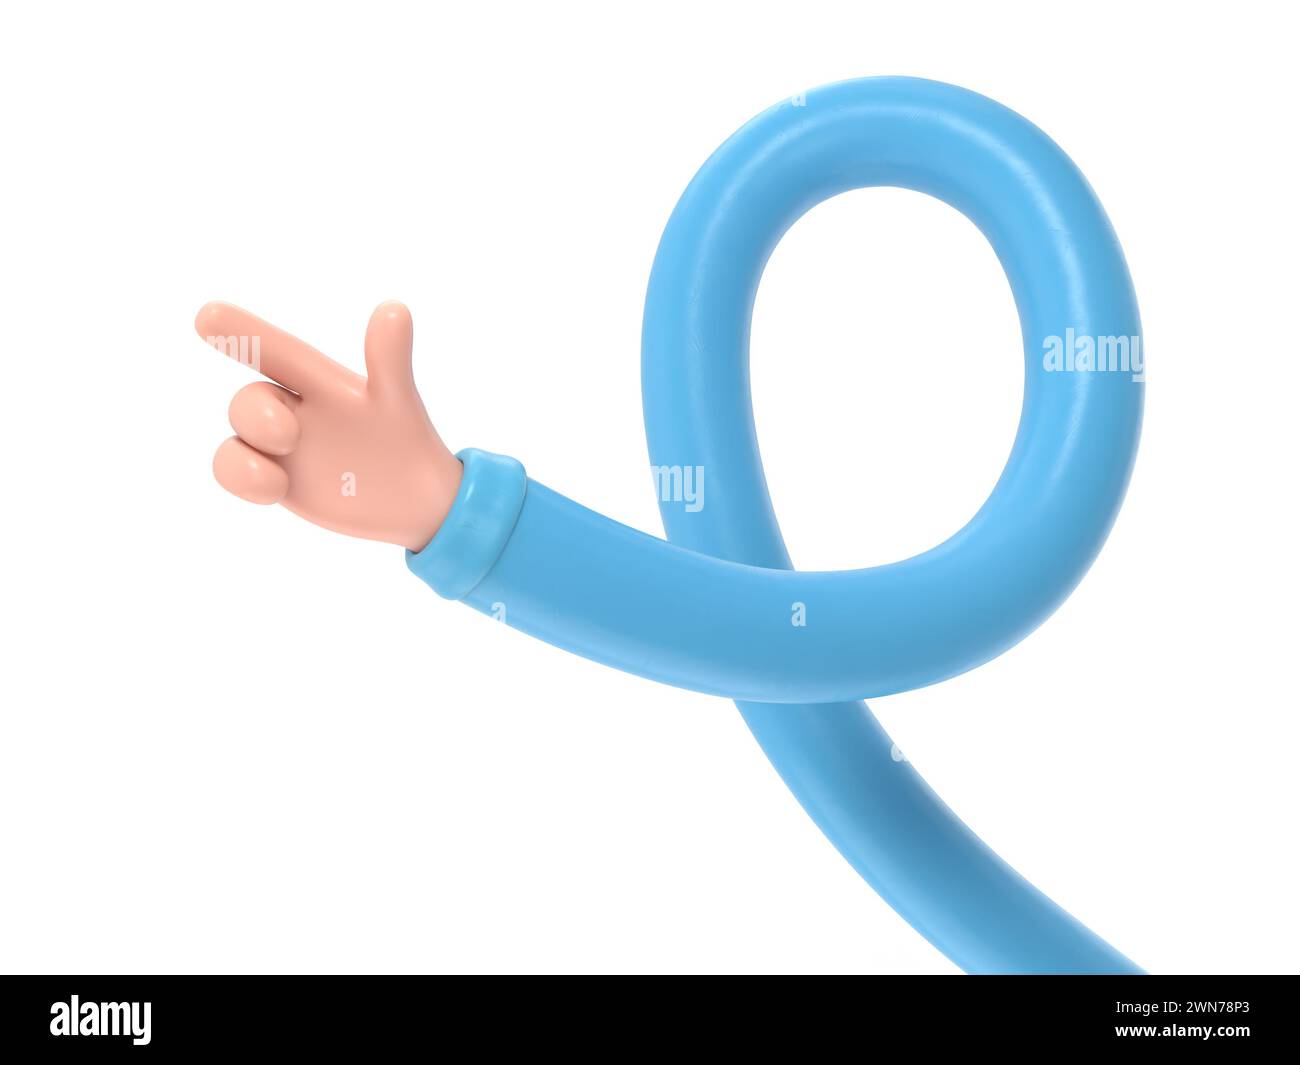 Cartoon Gesture Icon Mockup.Cartoon character hand pointing gesture. 3D rendering on white background.long arms concept. Stock Photo